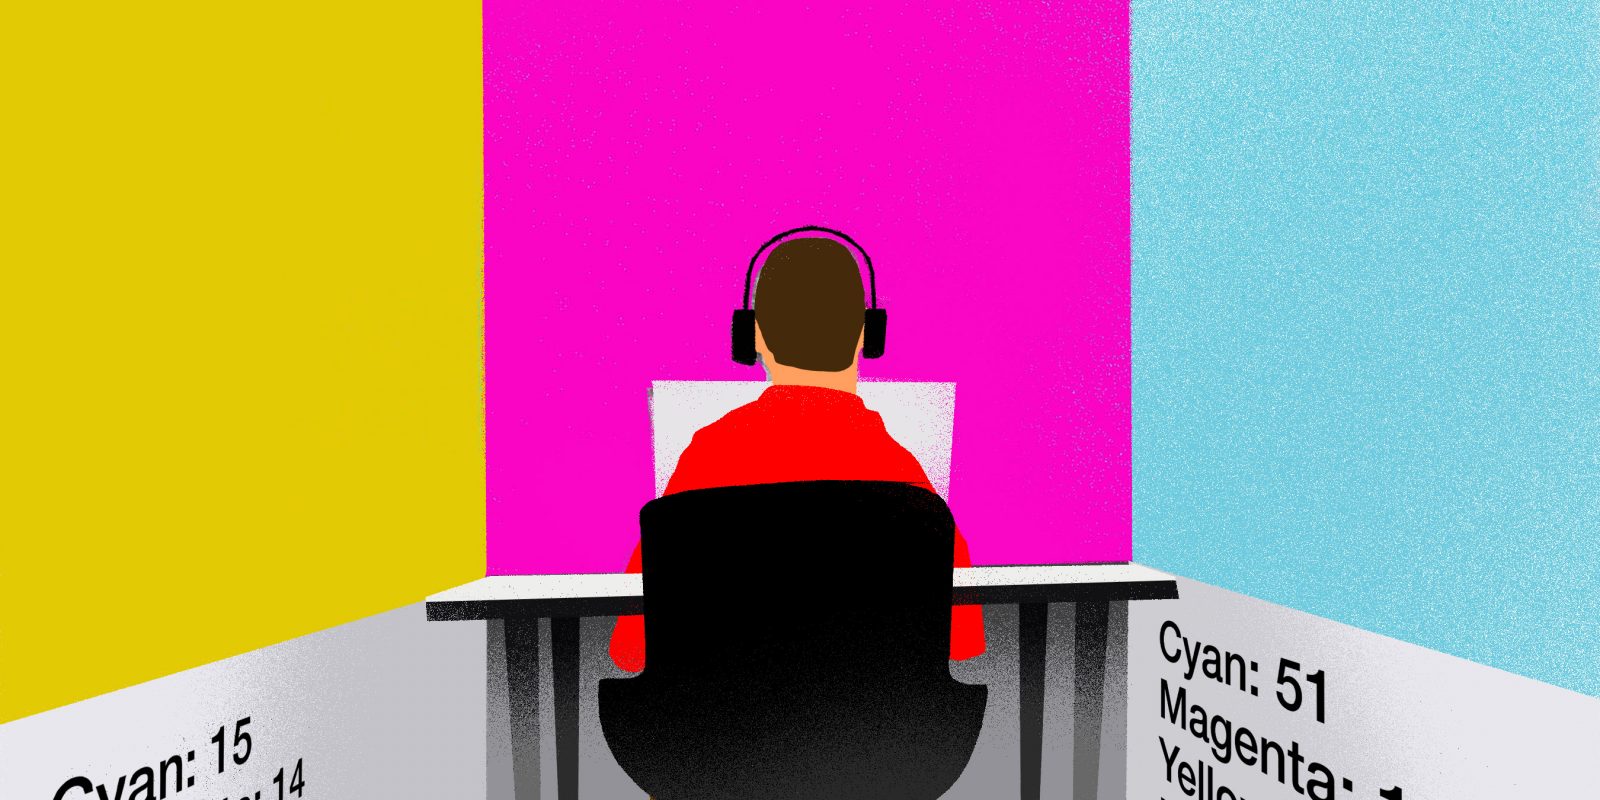 An illustration of a person sitting at a desk with headphones on. Pantone color blocks over the walls around them.